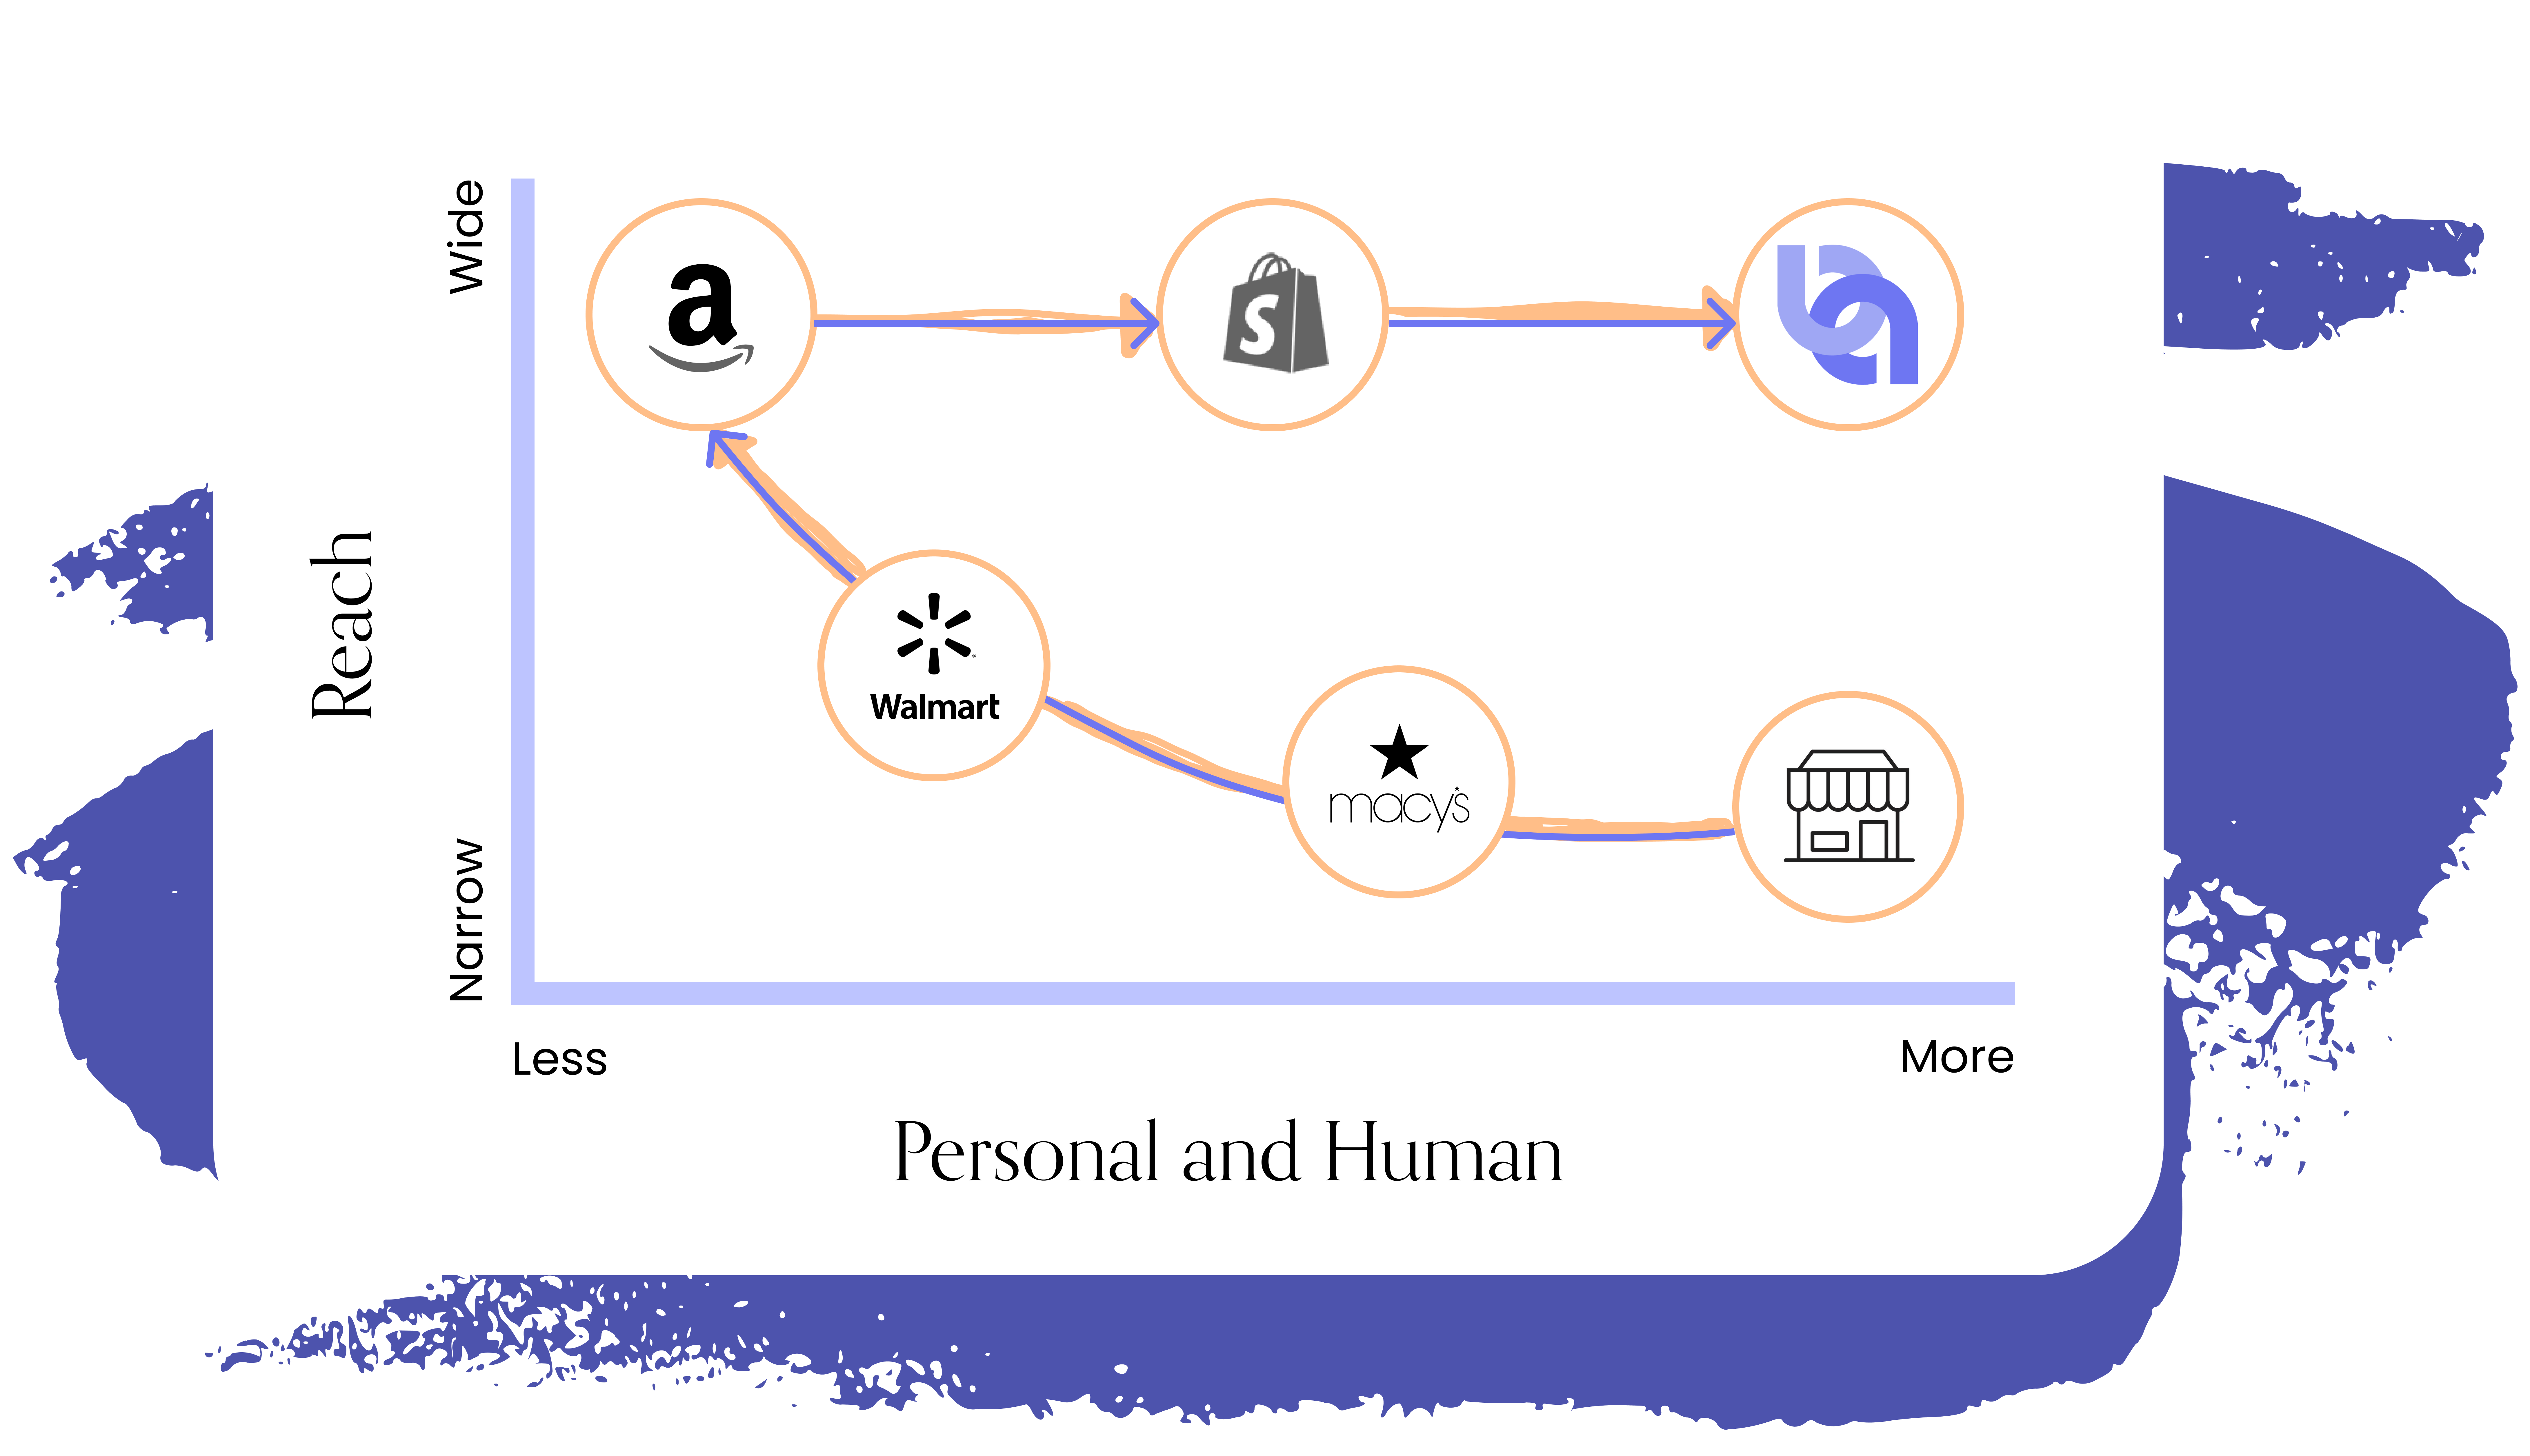 Retail: personal human touch vs reach